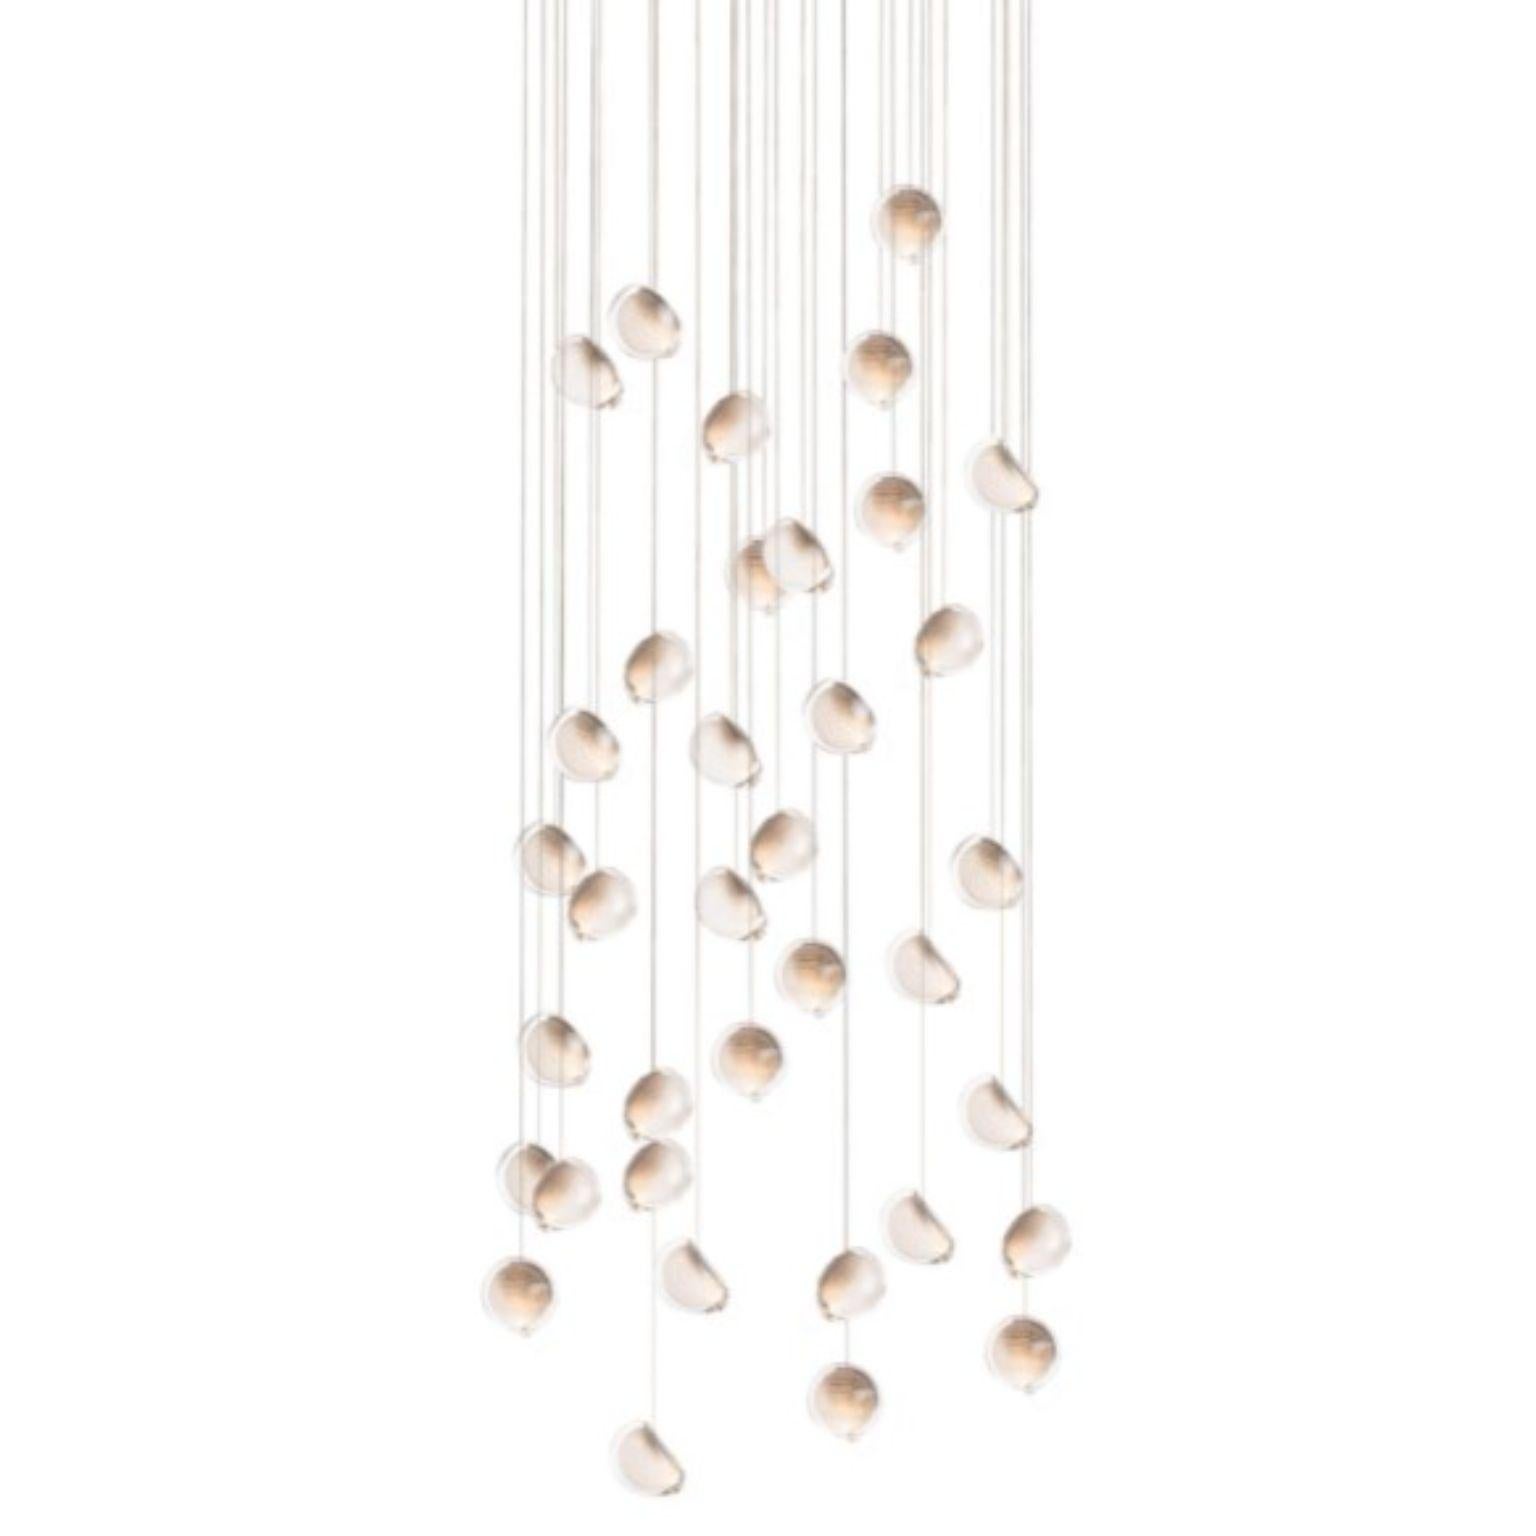 76.36 pendant by Bocci
Dimensions: D 110 x W 37 x H 300 cm
Materials: white powder coated square canopy
Weight: 40 kg
Also available in different dimensions.
All our lamps can be wired according to each country. If sold to the USA it will be